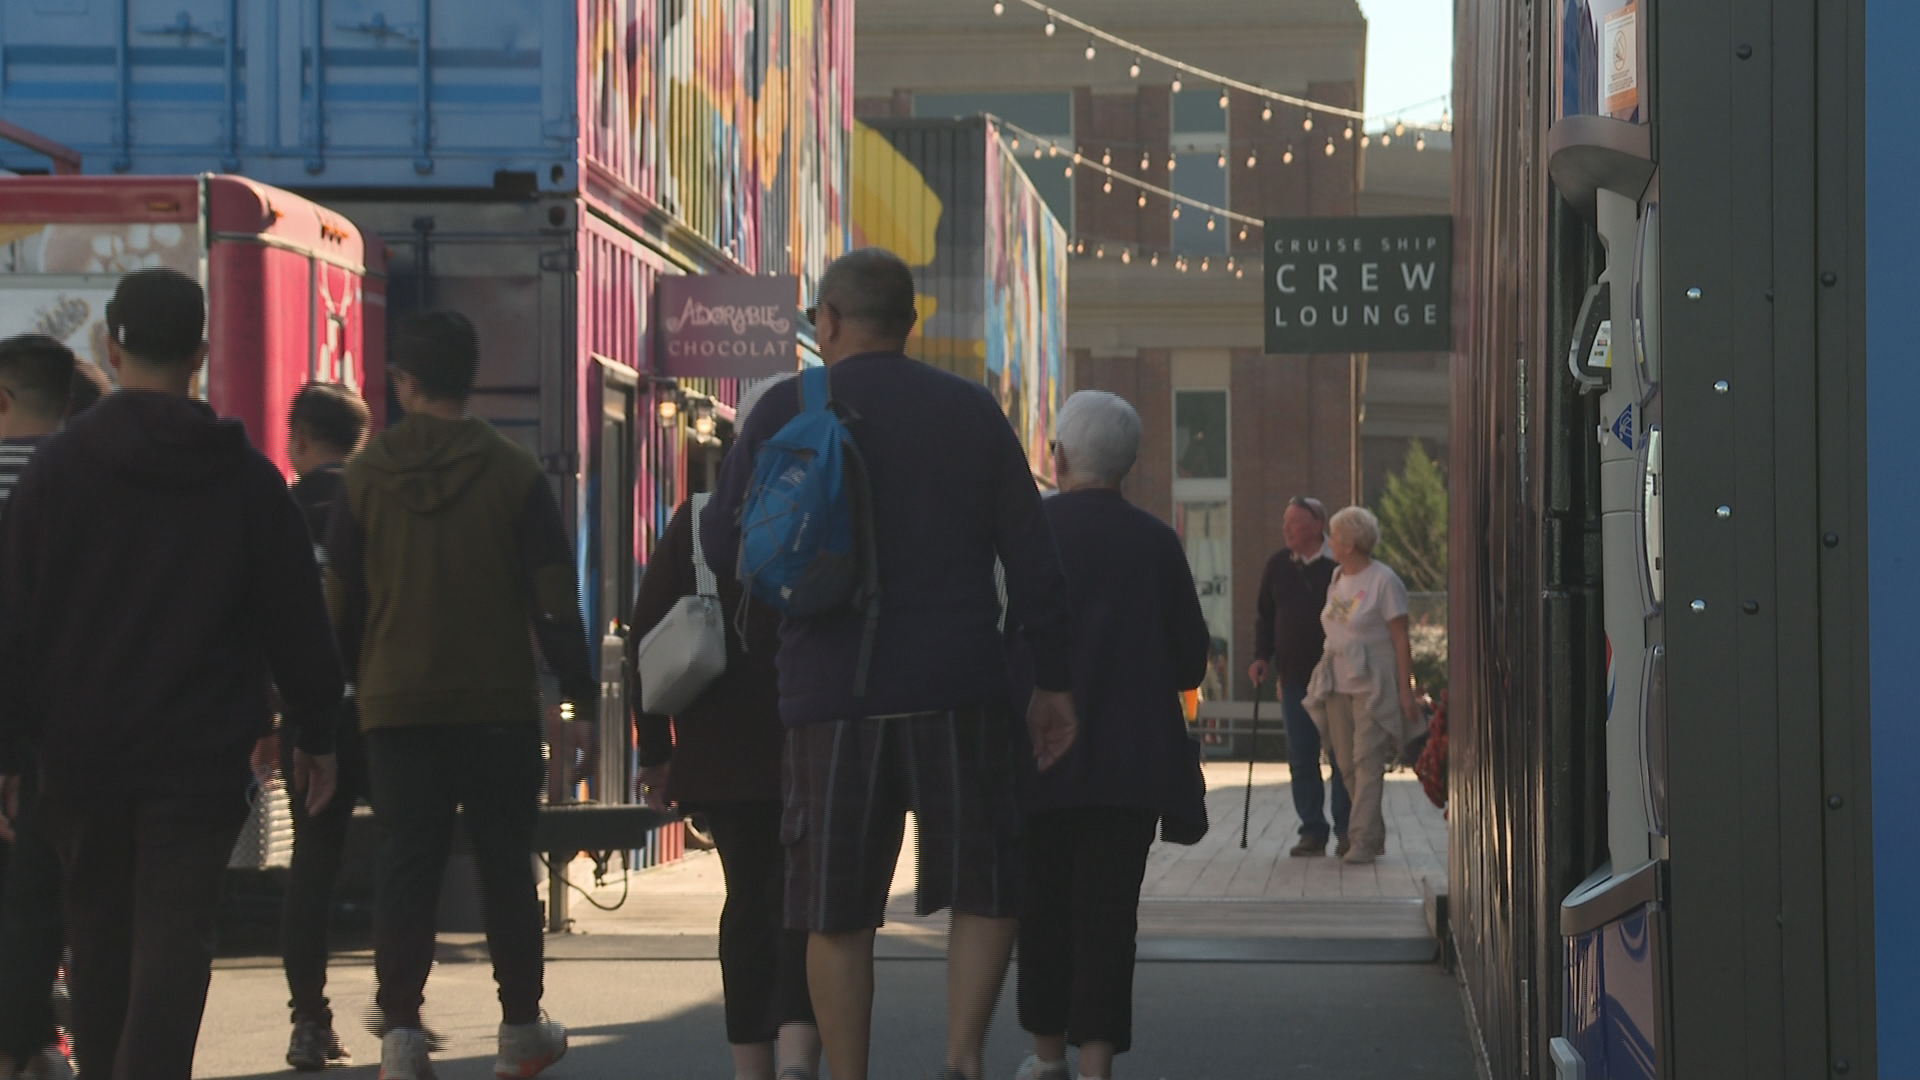 Saint John waterfront container village sees success in second year